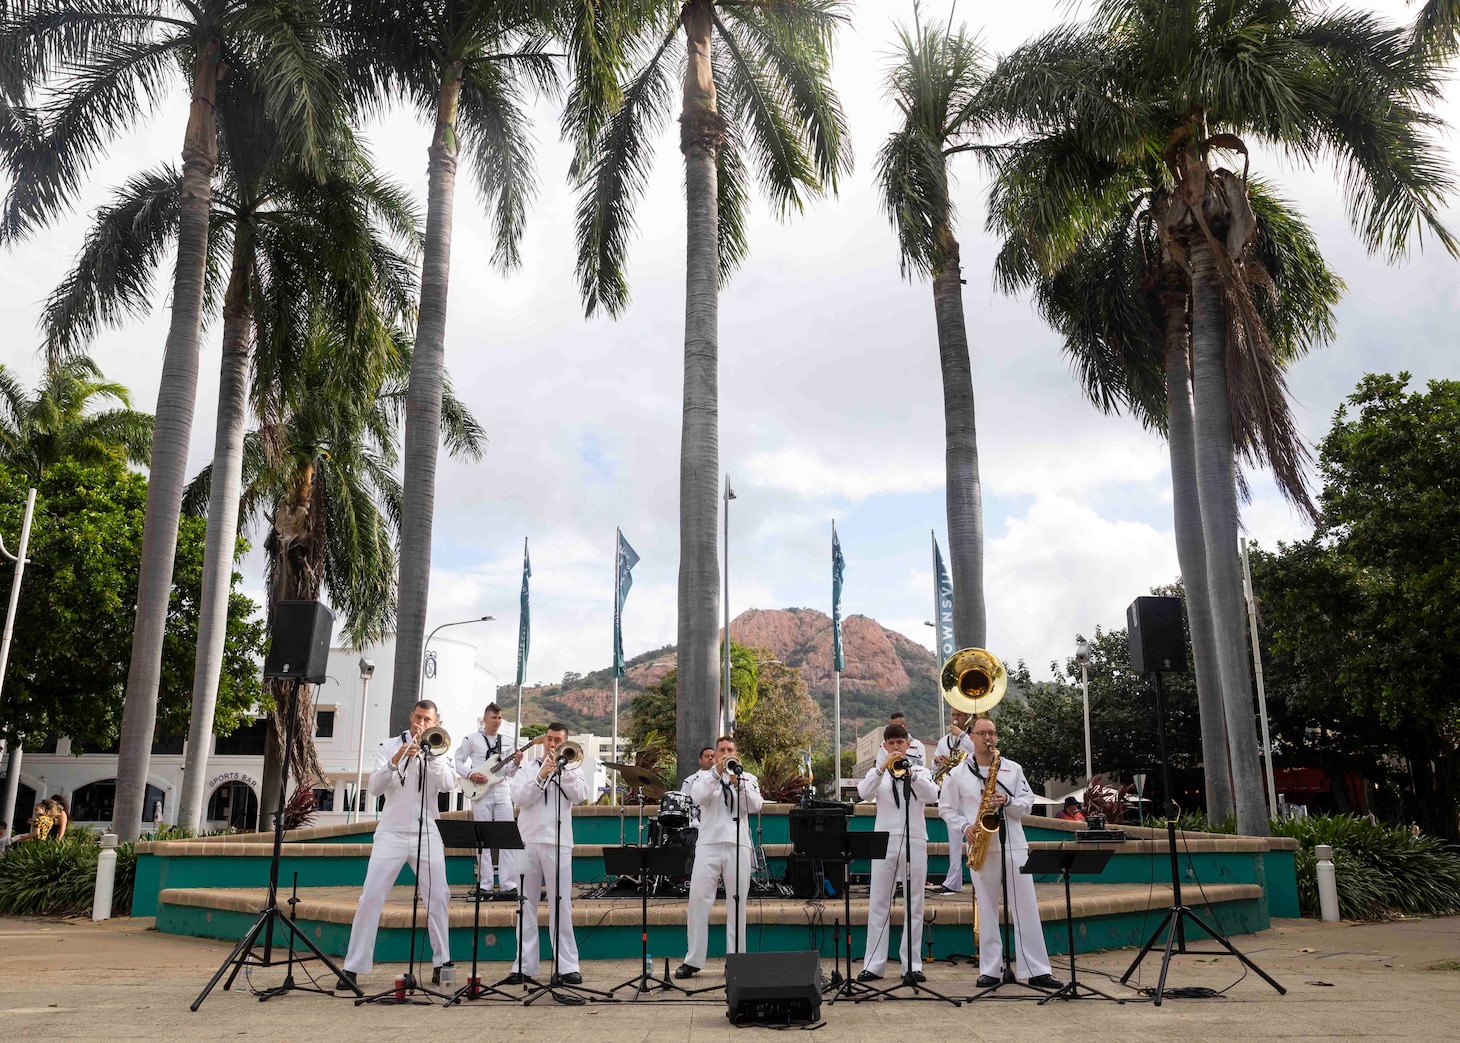 220502-N-VD554-2023 TOWNSVILLE, Australia (May 2, 2022) – Members of the U.S. 7th Fleet Band perform at Gregory Street Amphitheater in Townsville, Australia. Under Commander, U.S. Pacific Fleet, 7th Fleet is the U.S. Navy's largest forward-deployed numbered fleet, and routinely interacts and operates with 35 maritime nations in preserving a free and open Indo-Pacific region. (U.S. Navy photo by Mass Communication Specialist 2nd Class Aron Montano)